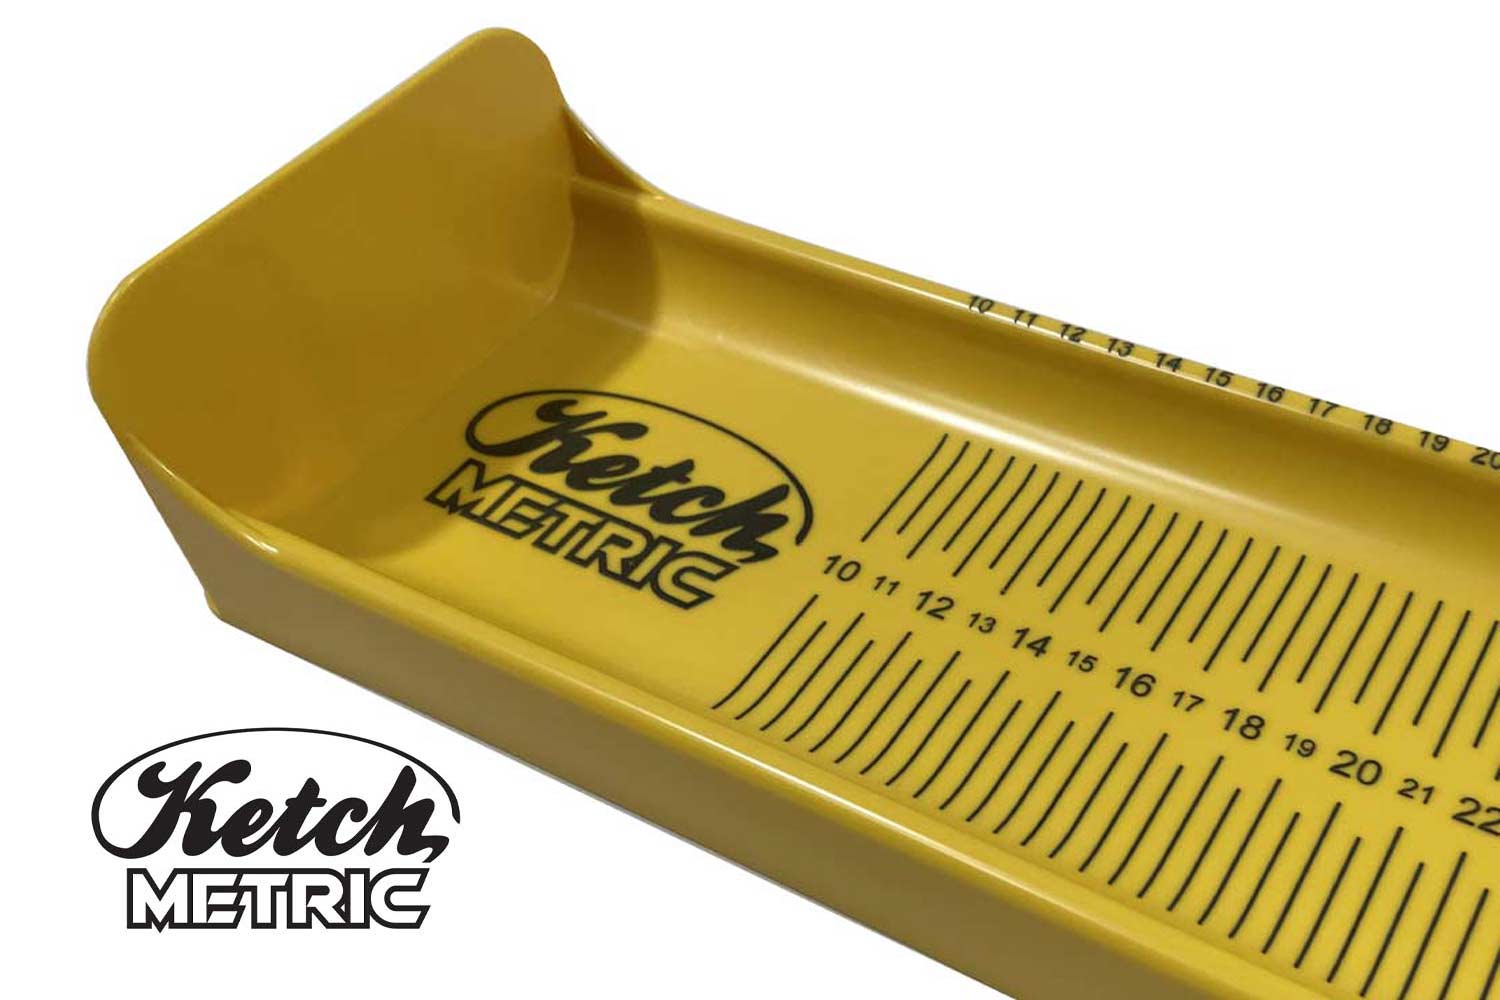 Best Bump Boards For Bank, Kayak, Boat, And Tournament Fishing - Featuring  Ketch Karbonate Board 